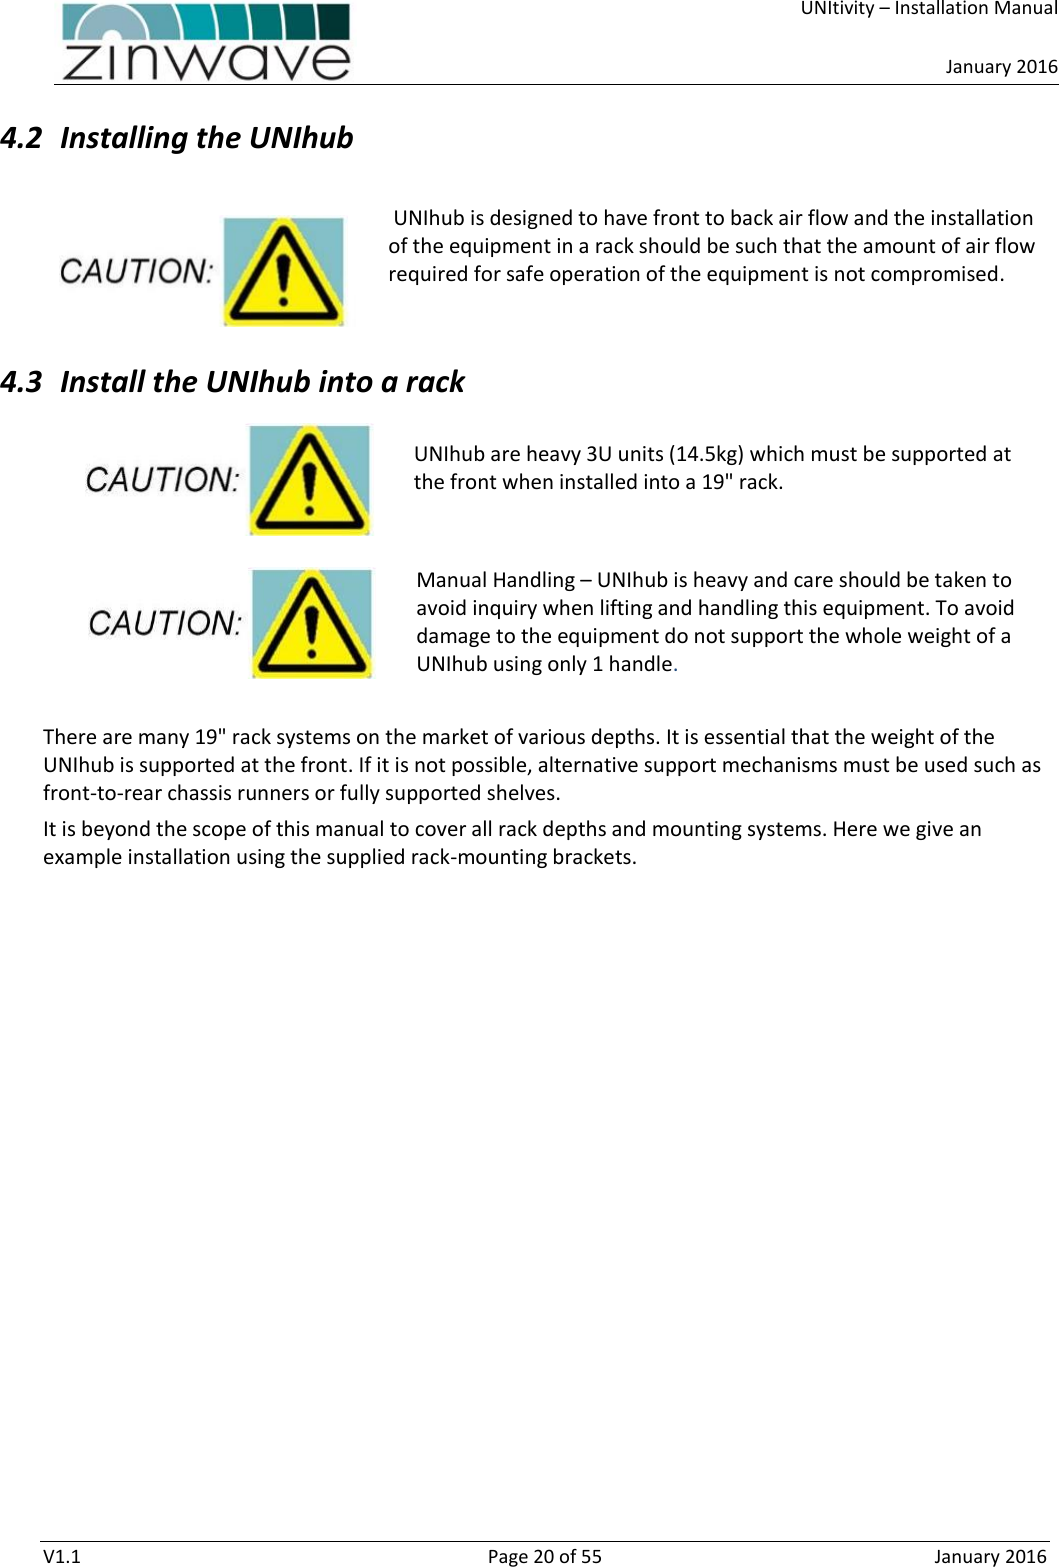     UNItivity – Installation Manual      January 2016  V1.1  Page 20 of 55  January 2016 4.2 Installing the UNIhub   UNIhub is designed to have front to back air flow and the installation of the equipment in a rack should be such that the amount of air flow required for safe operation of the equipment is not compromised.   4.3 Install the UNIhub into a rack  UNIhub are heavy 3U units (14.5kg) which must be supported at the front when installed into a 19&quot; rack.   Manual Handling – UNIhub is heavy and care should be taken to avoid inquiry when lifting and handling this equipment. To avoid damage to the equipment do not support the whole weight of a UNIhub using only 1 handle.  There are many 19&quot; rack systems on the market of various depths. It is essential that the weight of the UNIhub is supported at the front. If it is not possible, alternative support mechanisms must be used such as front-to-rear chassis runners or fully supported shelves.  It is beyond the scope of this manual to cover all rack depths and mounting systems. Here we give an example installation using the supplied rack-mounting brackets.    